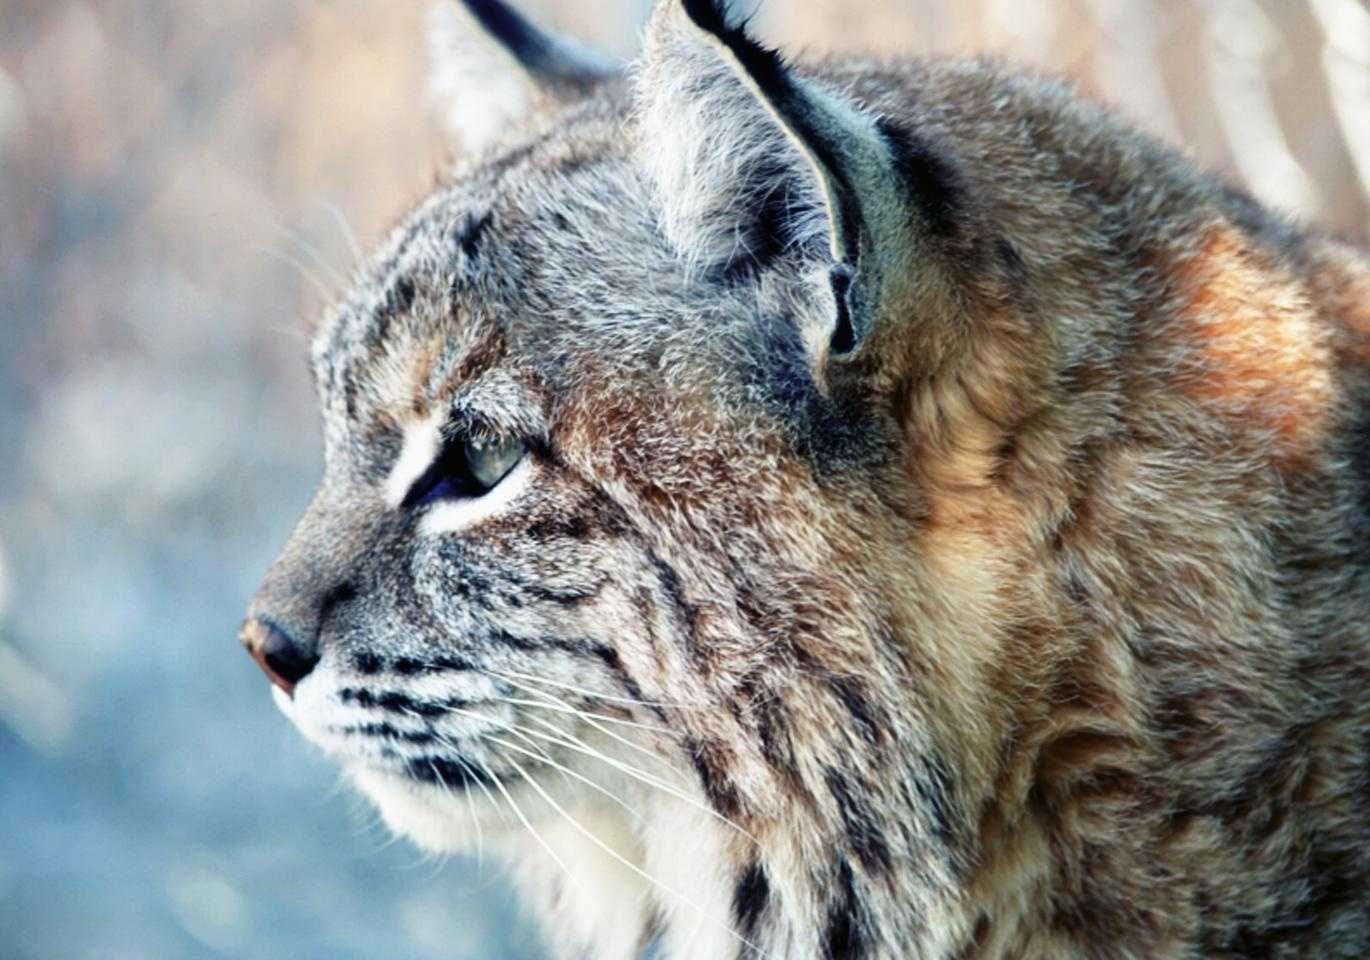 California confirms first wild bobcat with highly pathogenic avian